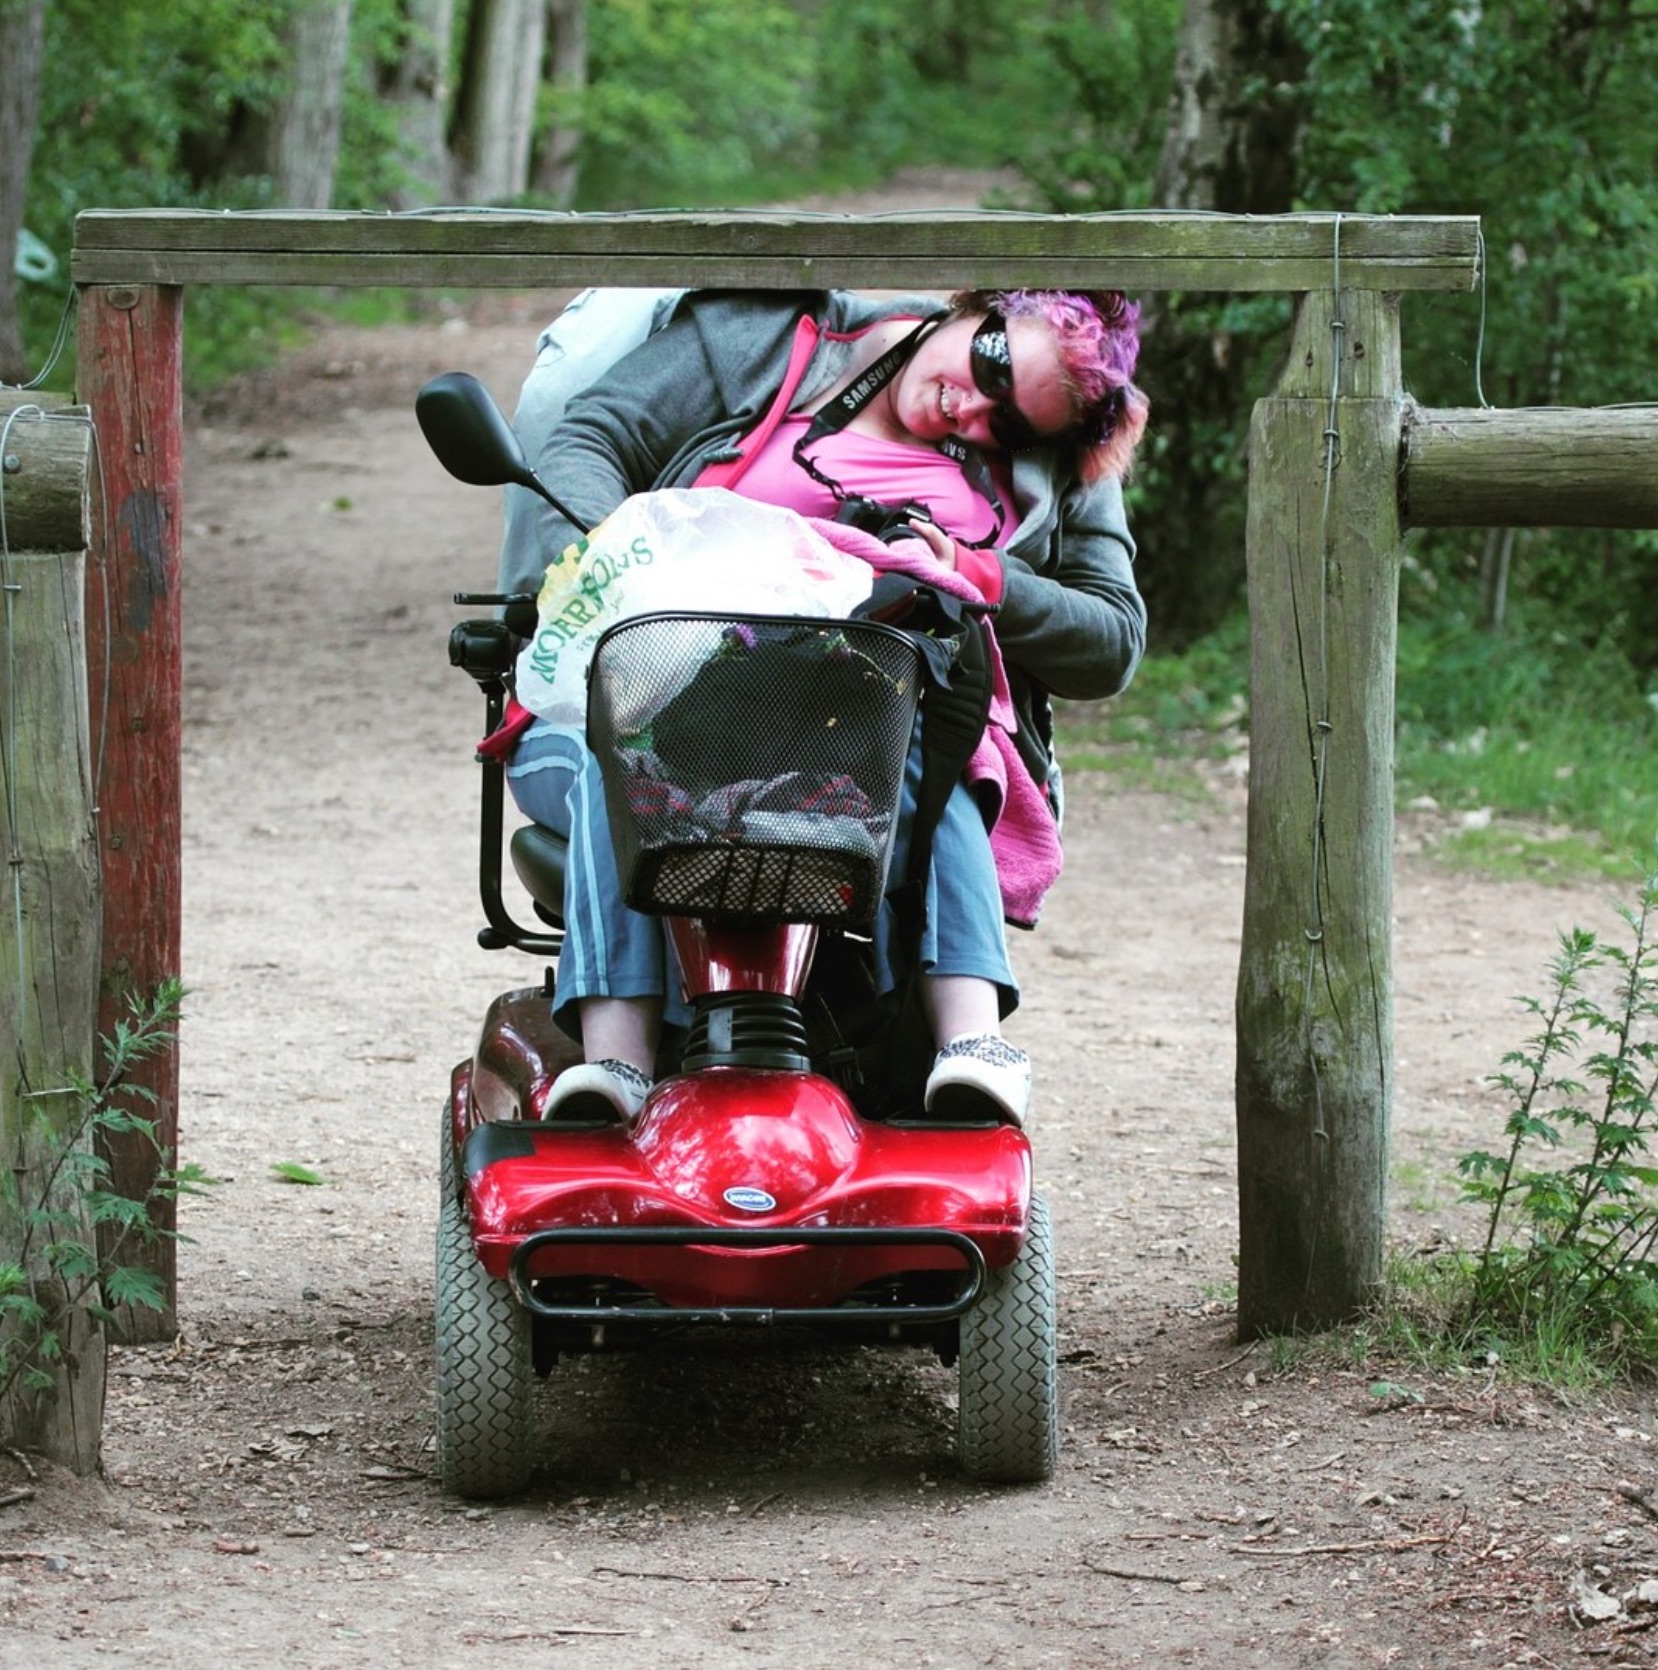 A pink-haired woman in sunglasses and a wheelchair cranes her neck to one side to roll under a wooden crossbeam blocking a dirt path through a forest.